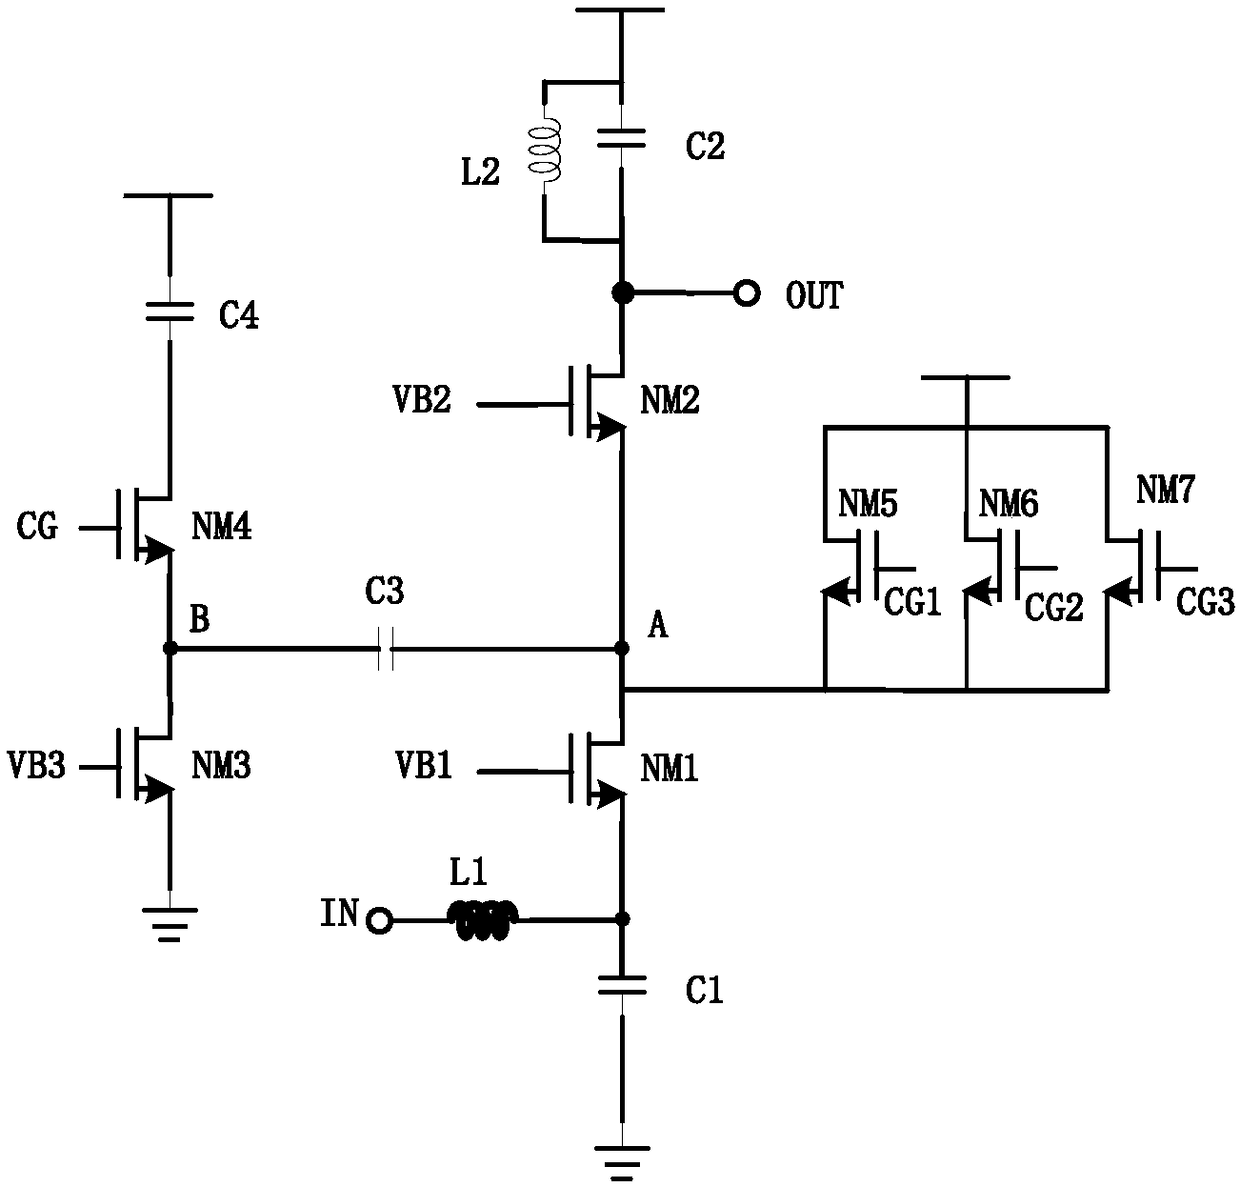 A gain adjustment structure based on cascode low noise amplifier